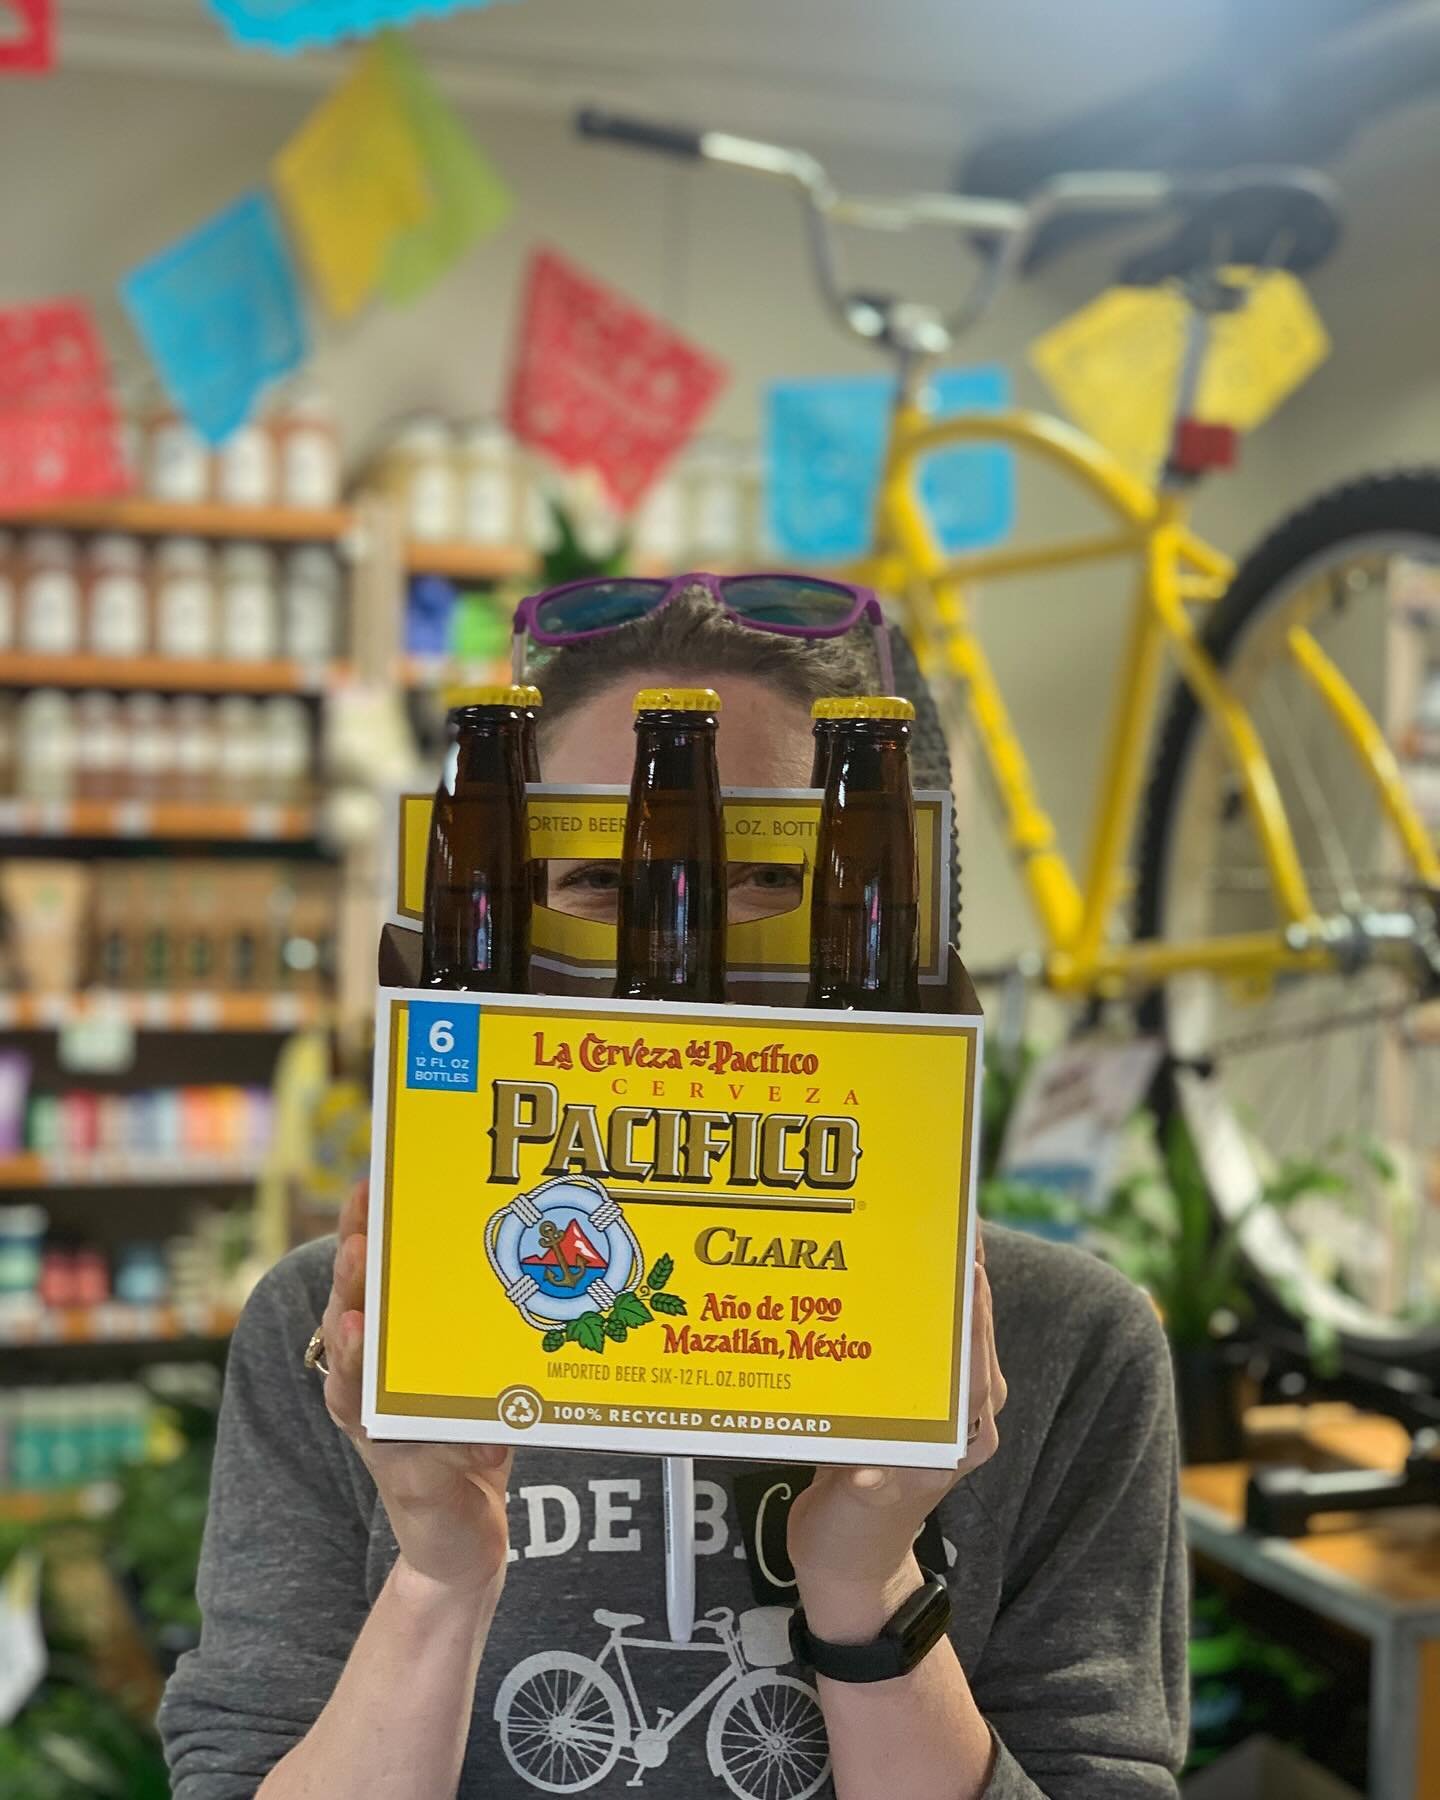 Anyone seen Carole? Been lookin for her all day! Oh well, guess we&rsquo;ll have to crack open a cold bottle of @pacificobeer while we wait. Get it on sale all month!